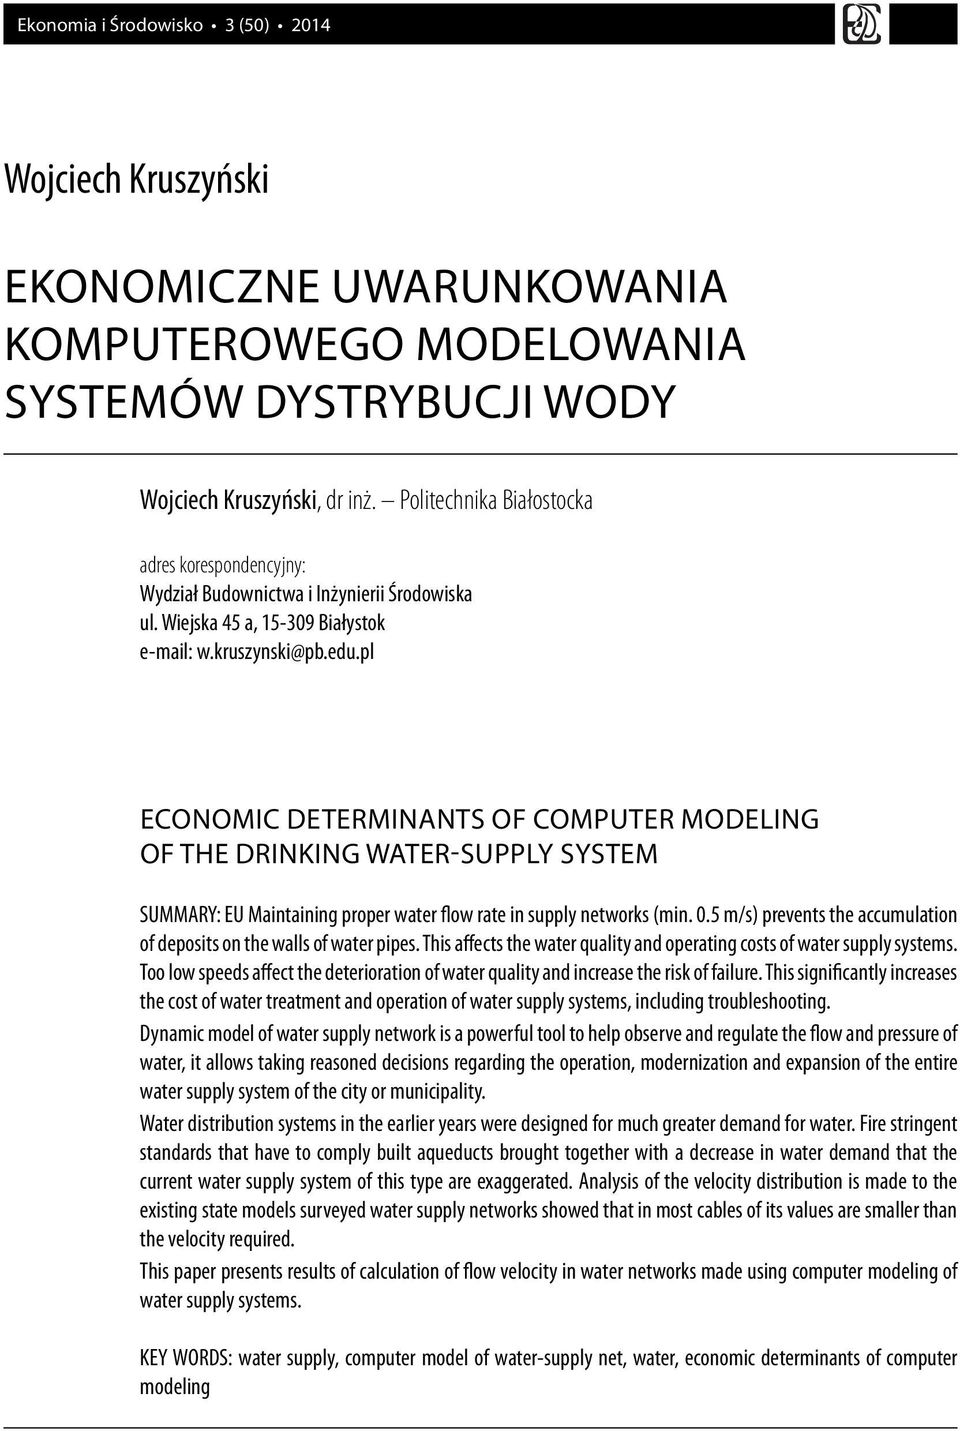 pl ECONOMIC DETERMINANTS OF COMPUTER MODELING OF THE DRINKING WATER-SUPPLY SYSTEM SUMMARY: EU Maintaining proper water flow rate in supply networks (min. 0.